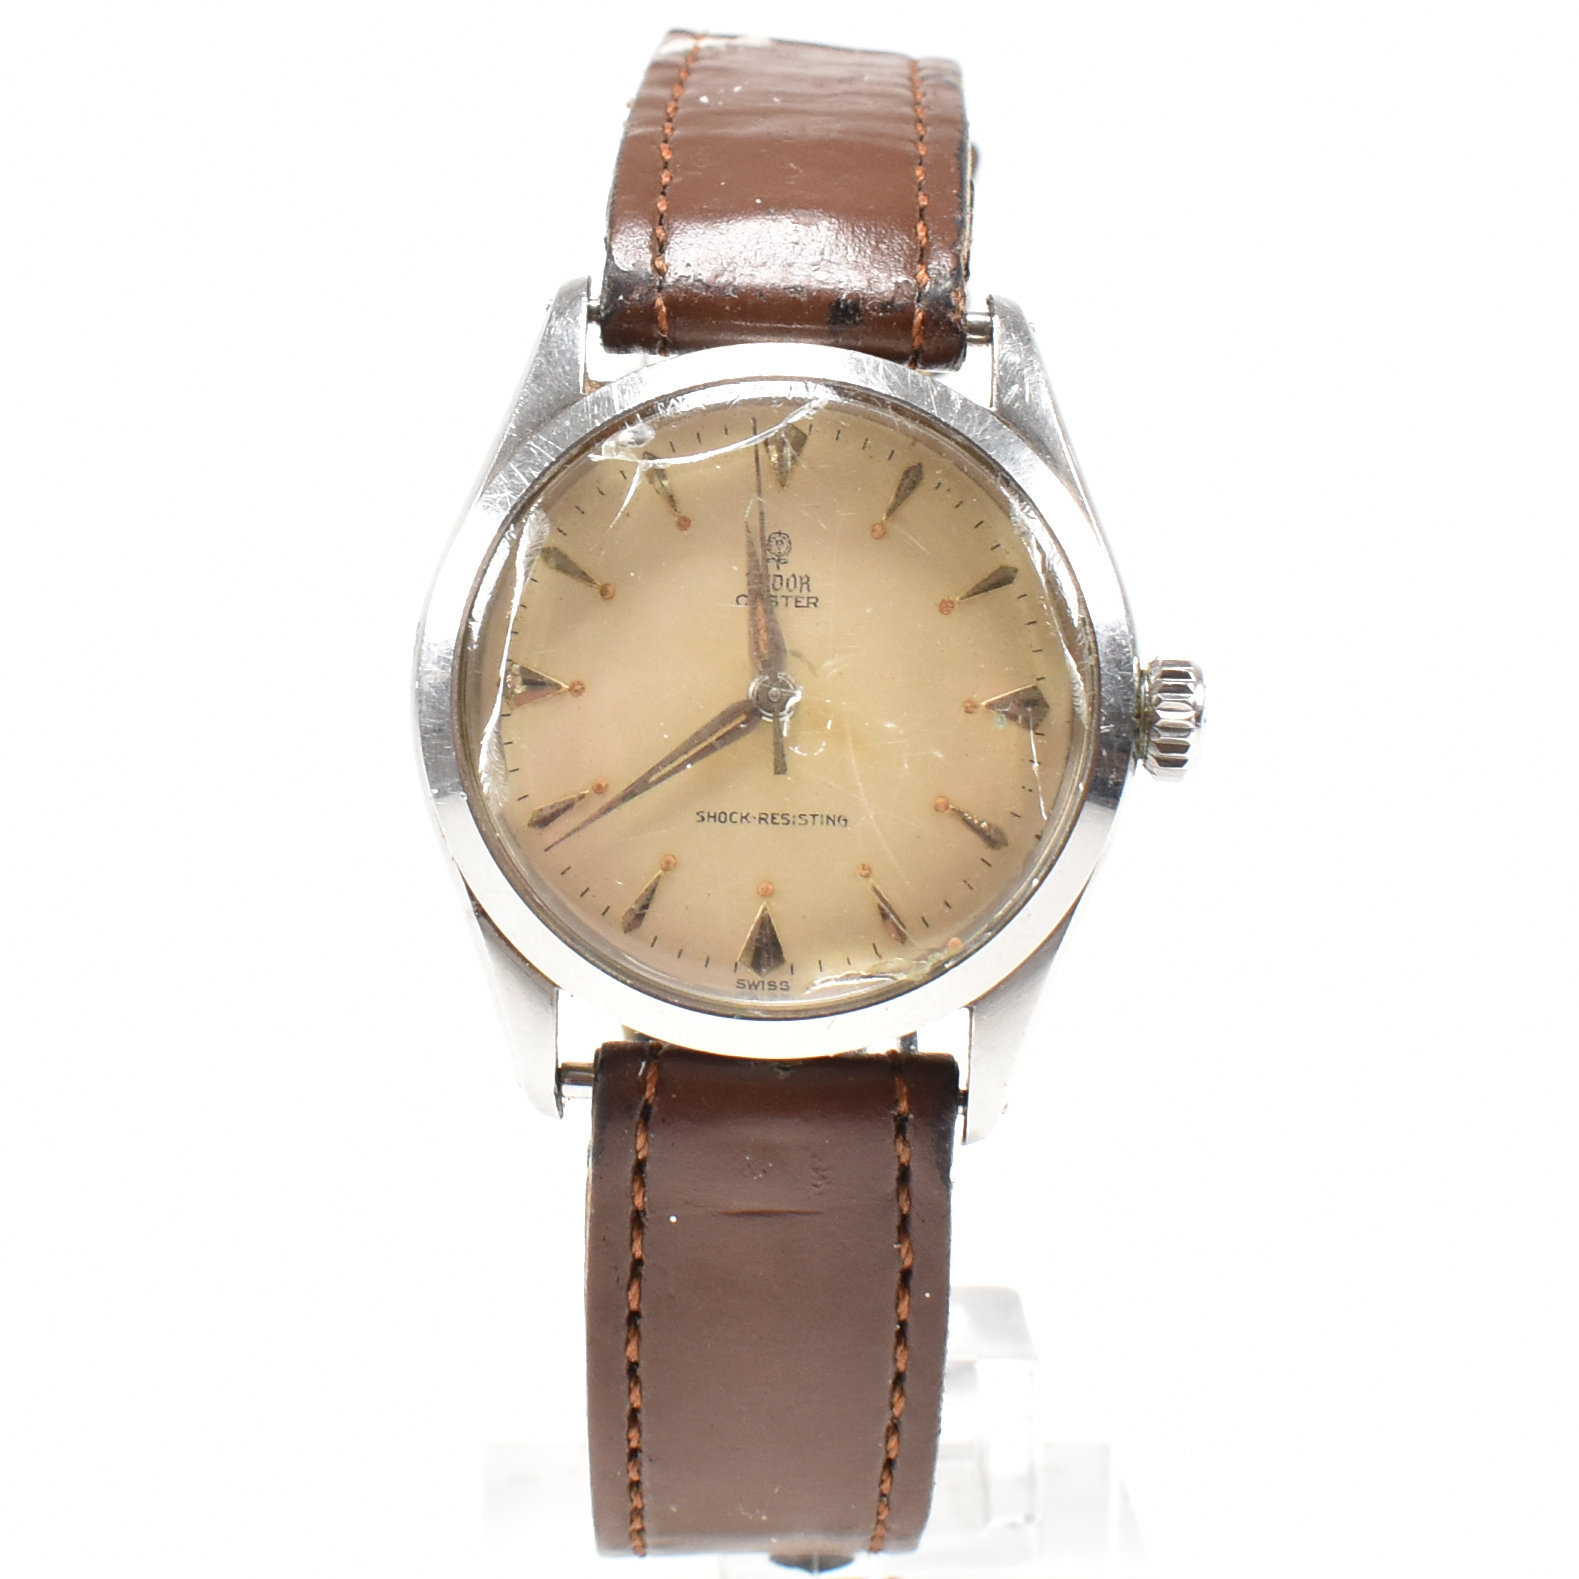 MID CENTURY TUDOR OYSTER STAINLESS STEEL WRISTWATCH - Image 7 of 7